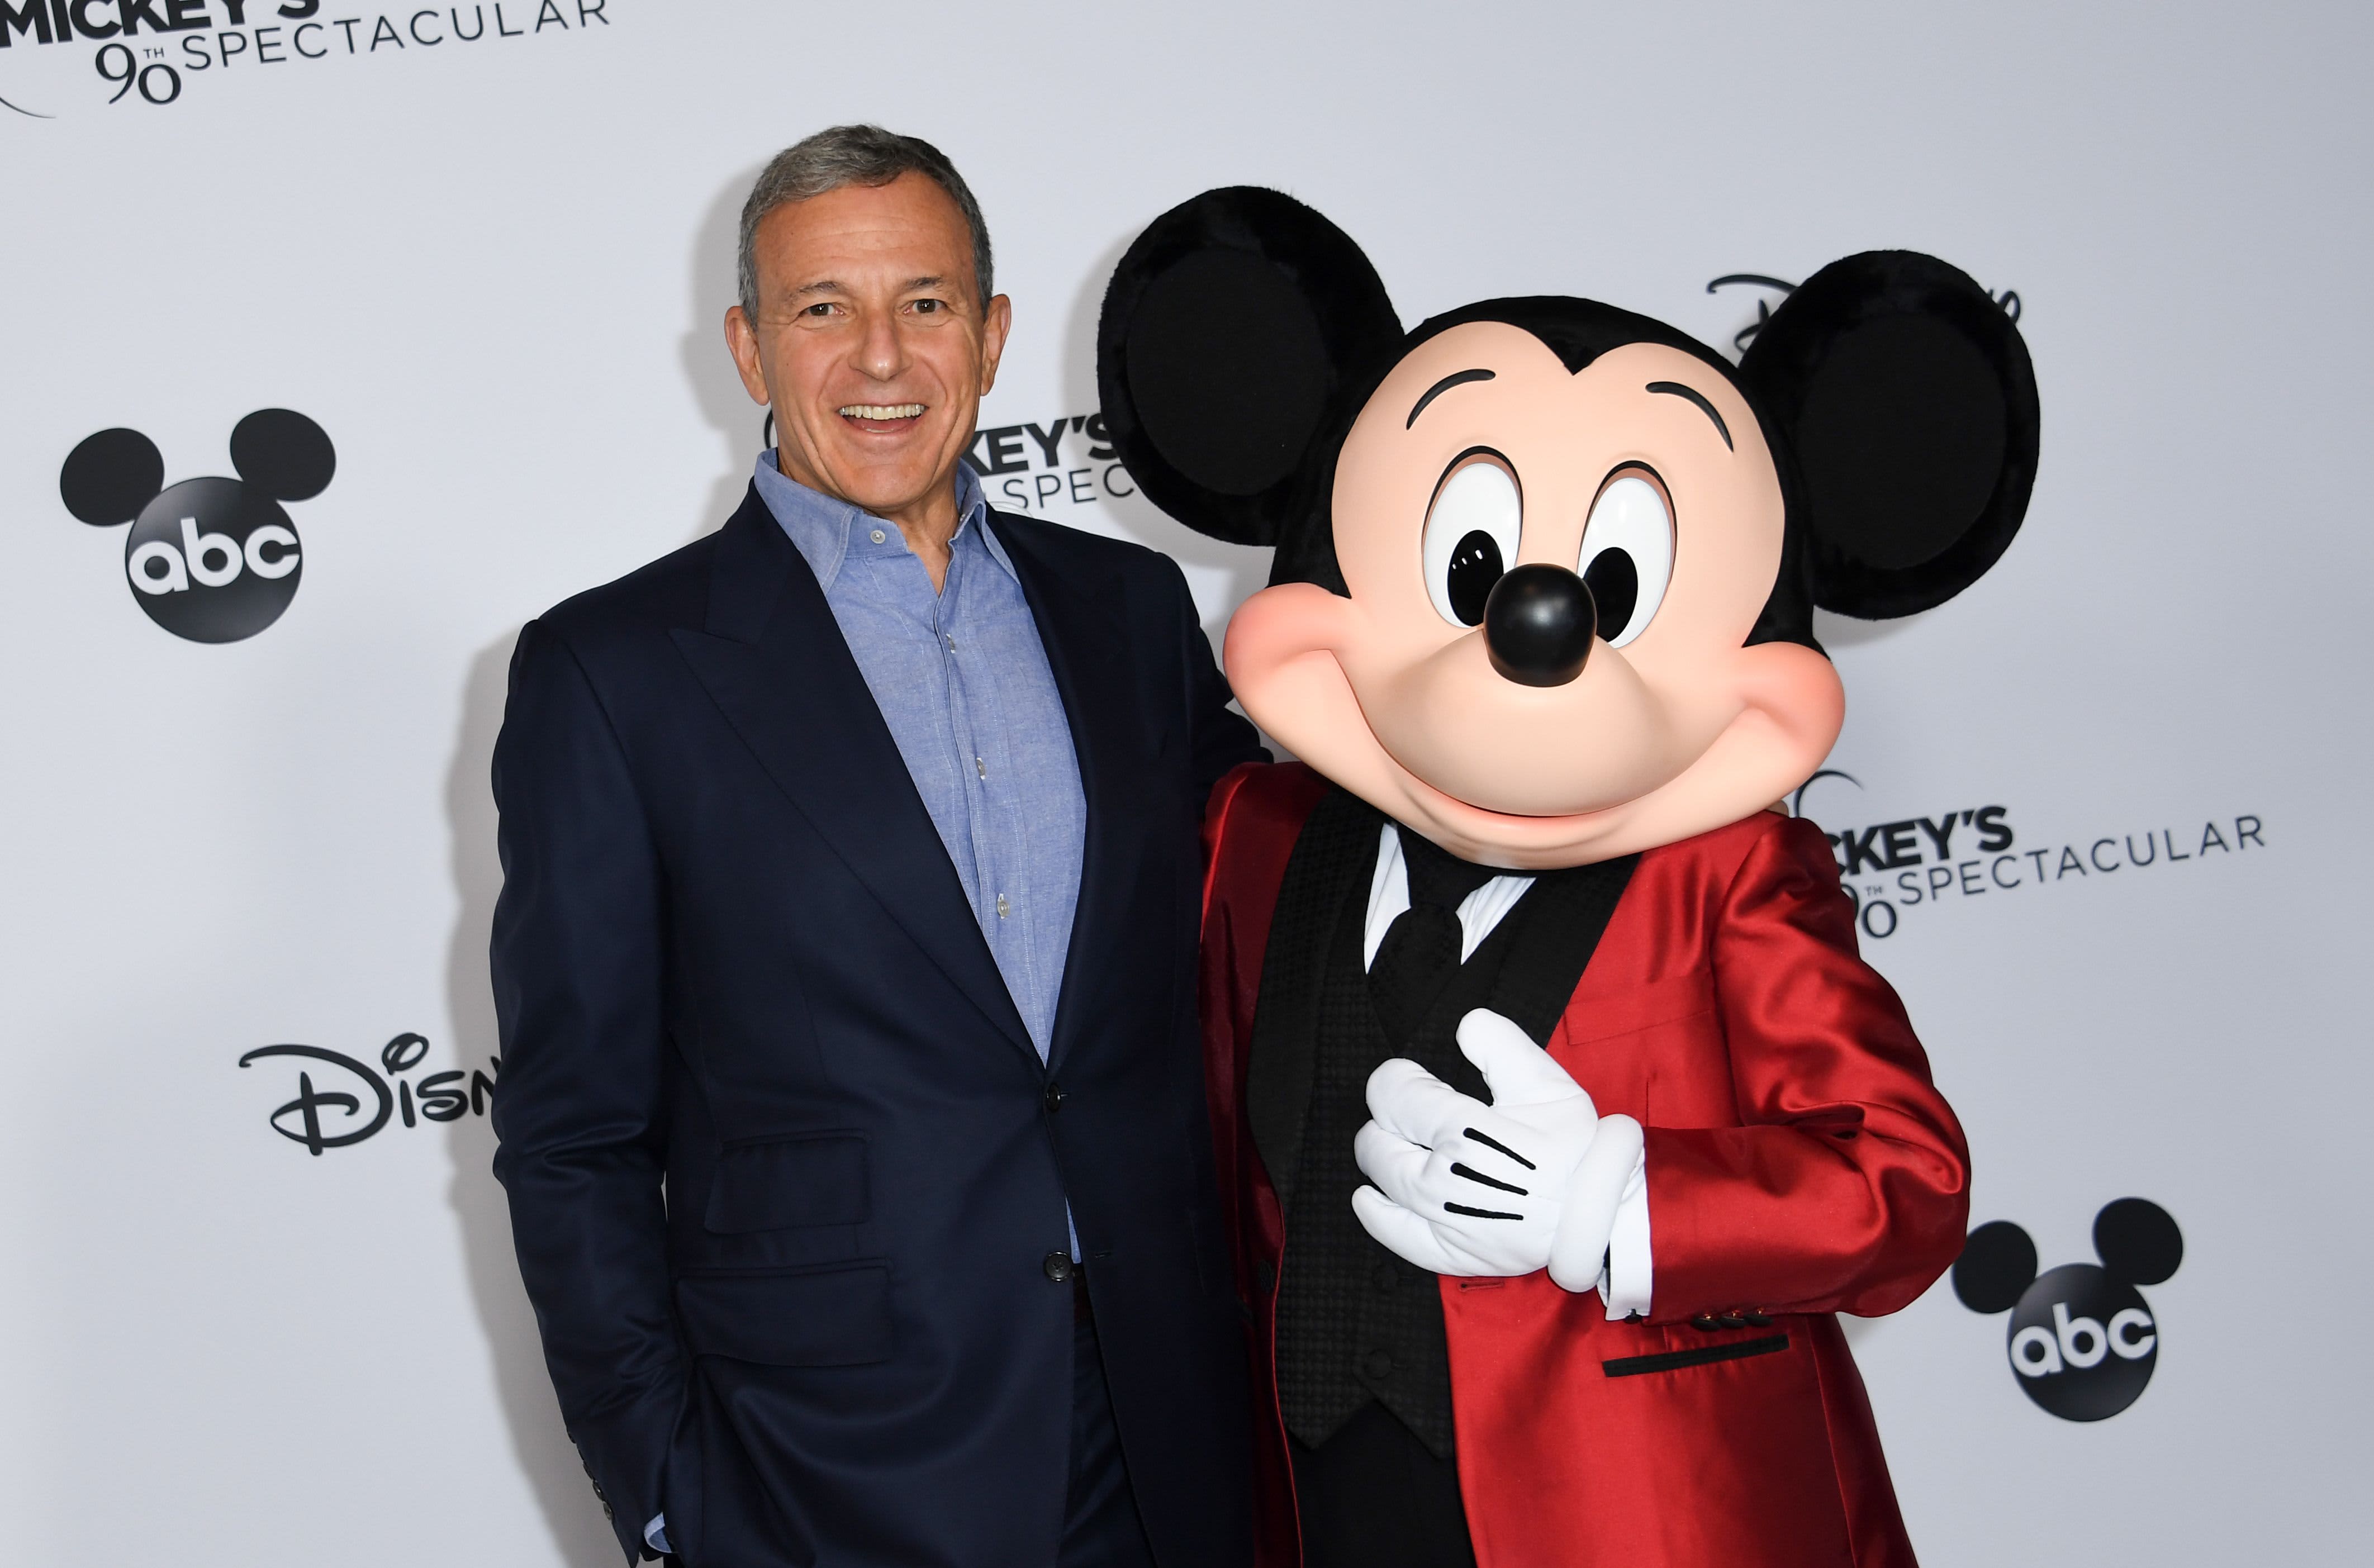 Wells Fargo sees Disney up nearly 50% over the next year if Iger makes that big move